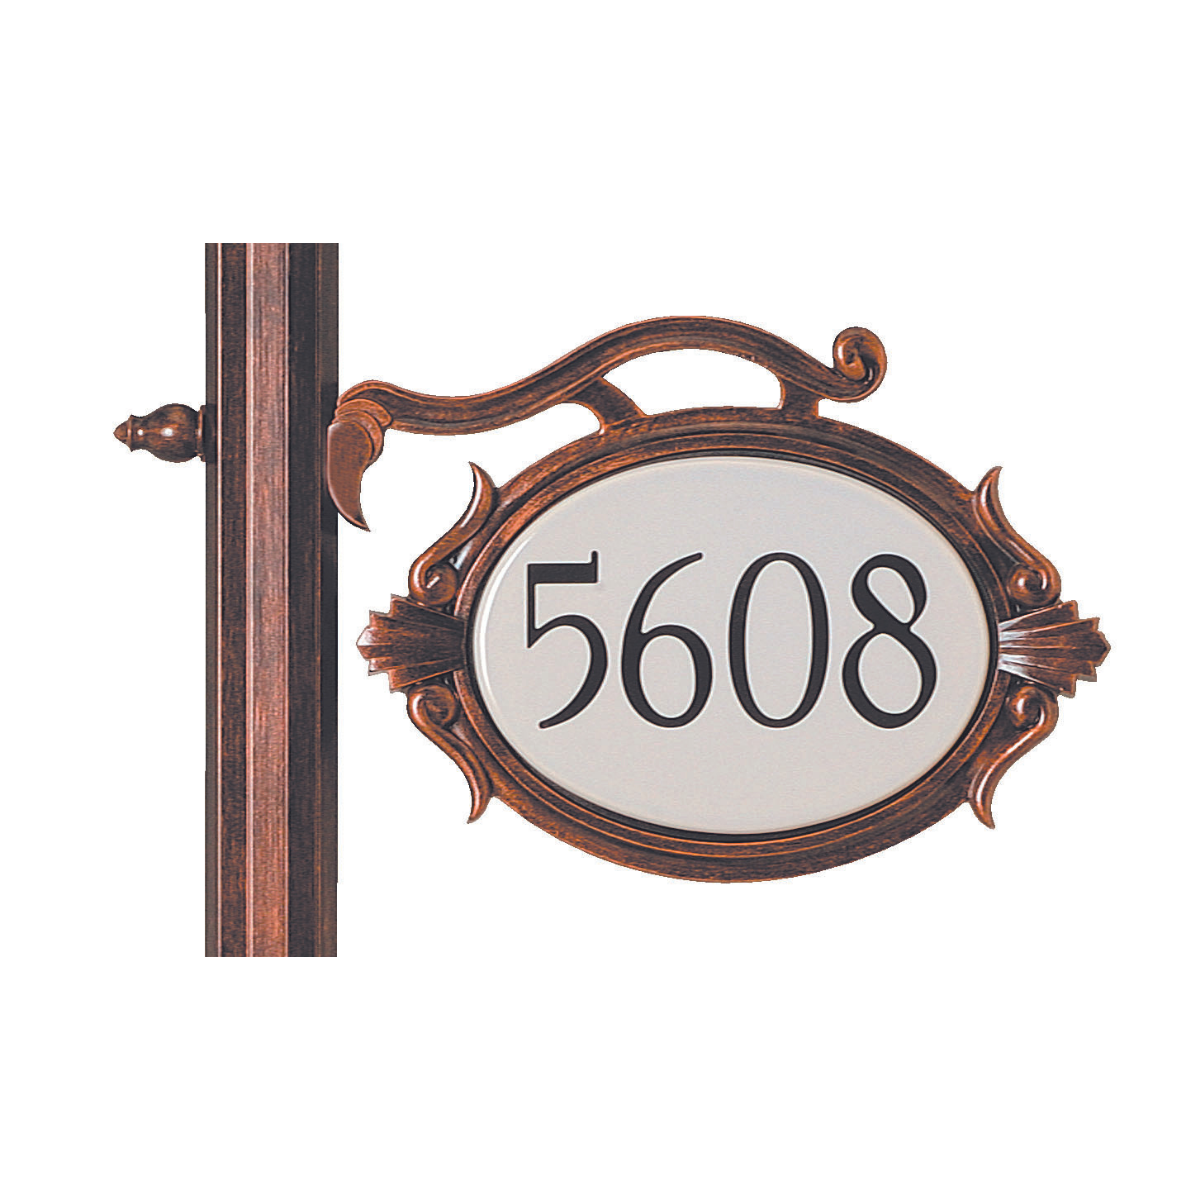 Florence - Horizontal address plaque for post - 1734